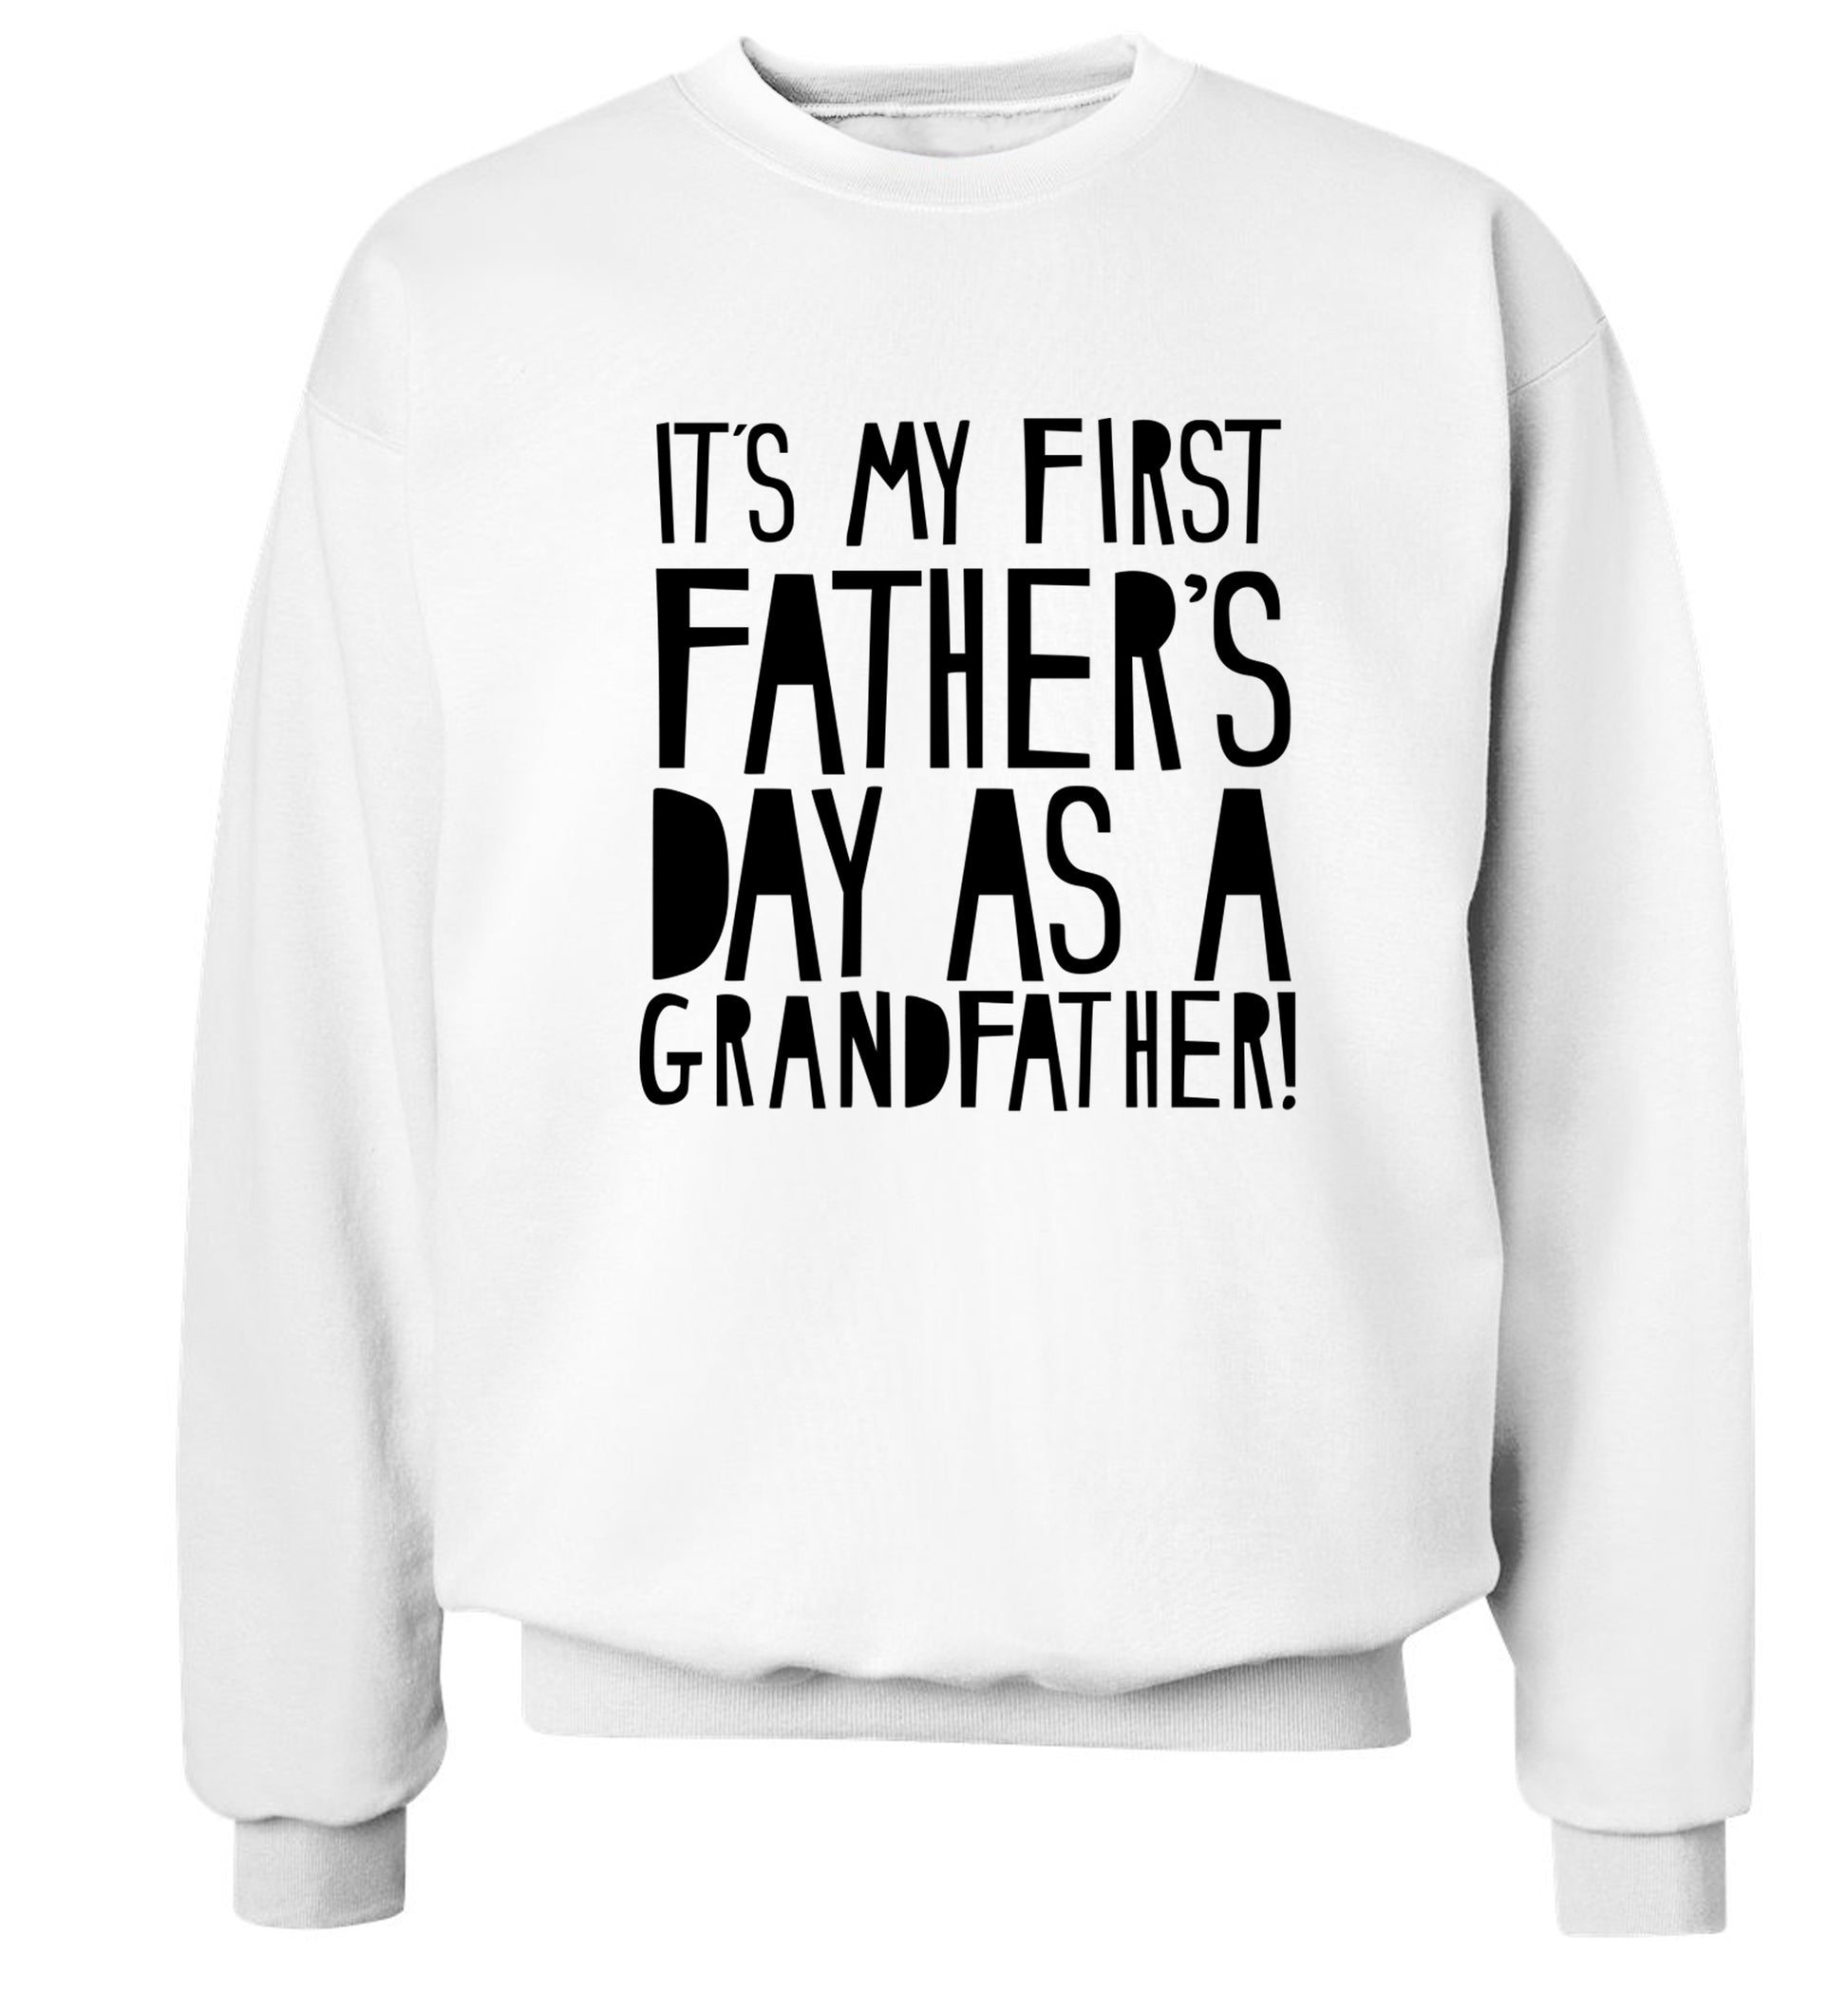 It's my first Father's Day as a Grandfather! Adult's unisex white Sweater 2XL